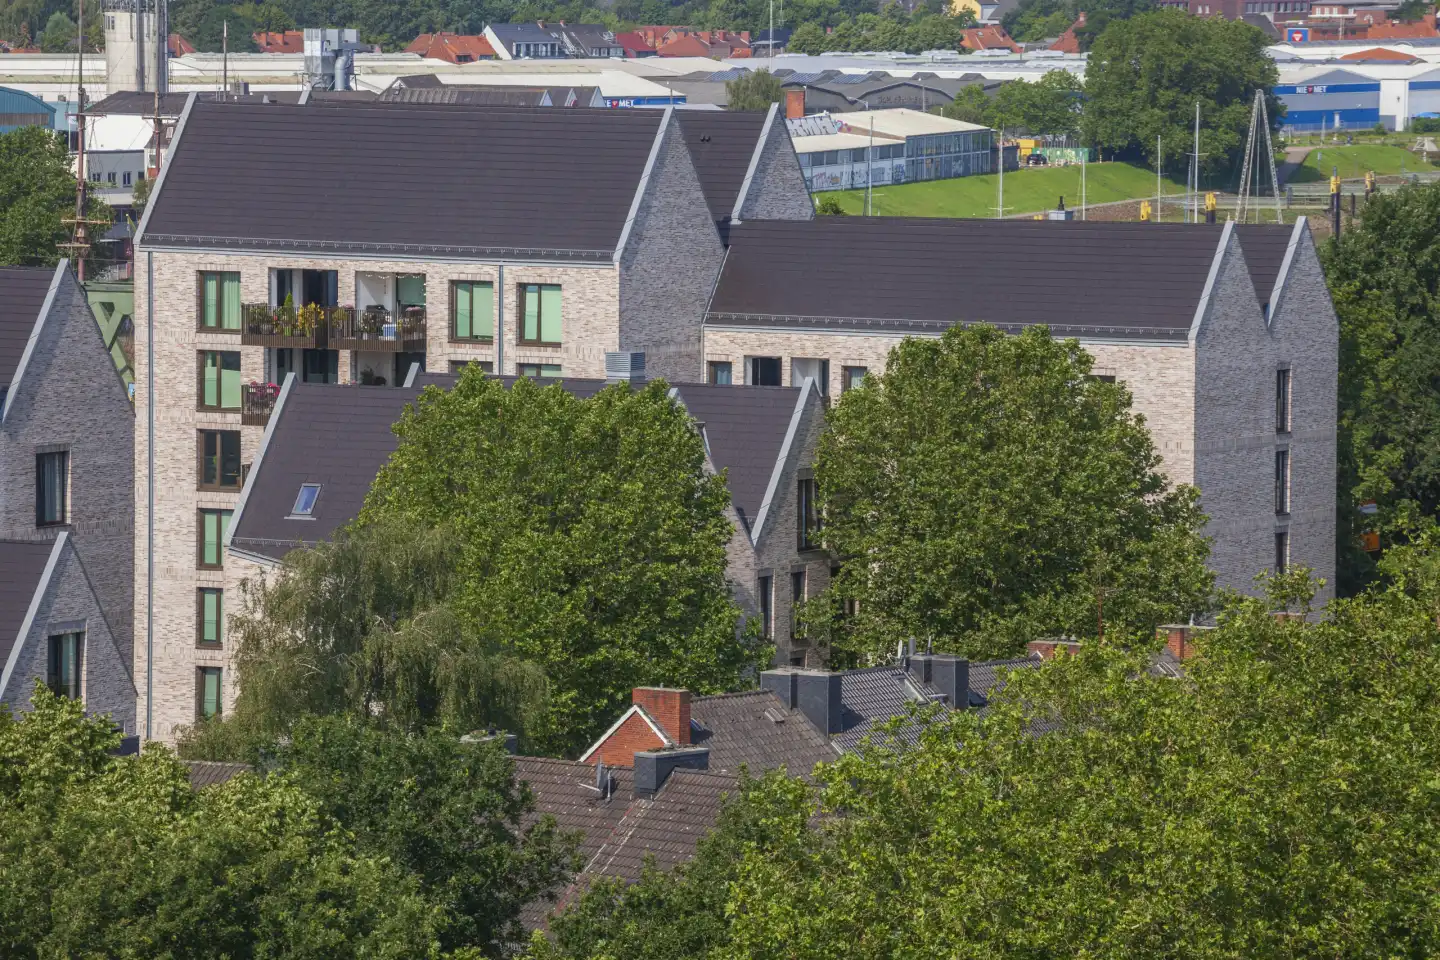 Modern residential buildings with roofs from the Volgelschau, Bremen, Germany, Europe